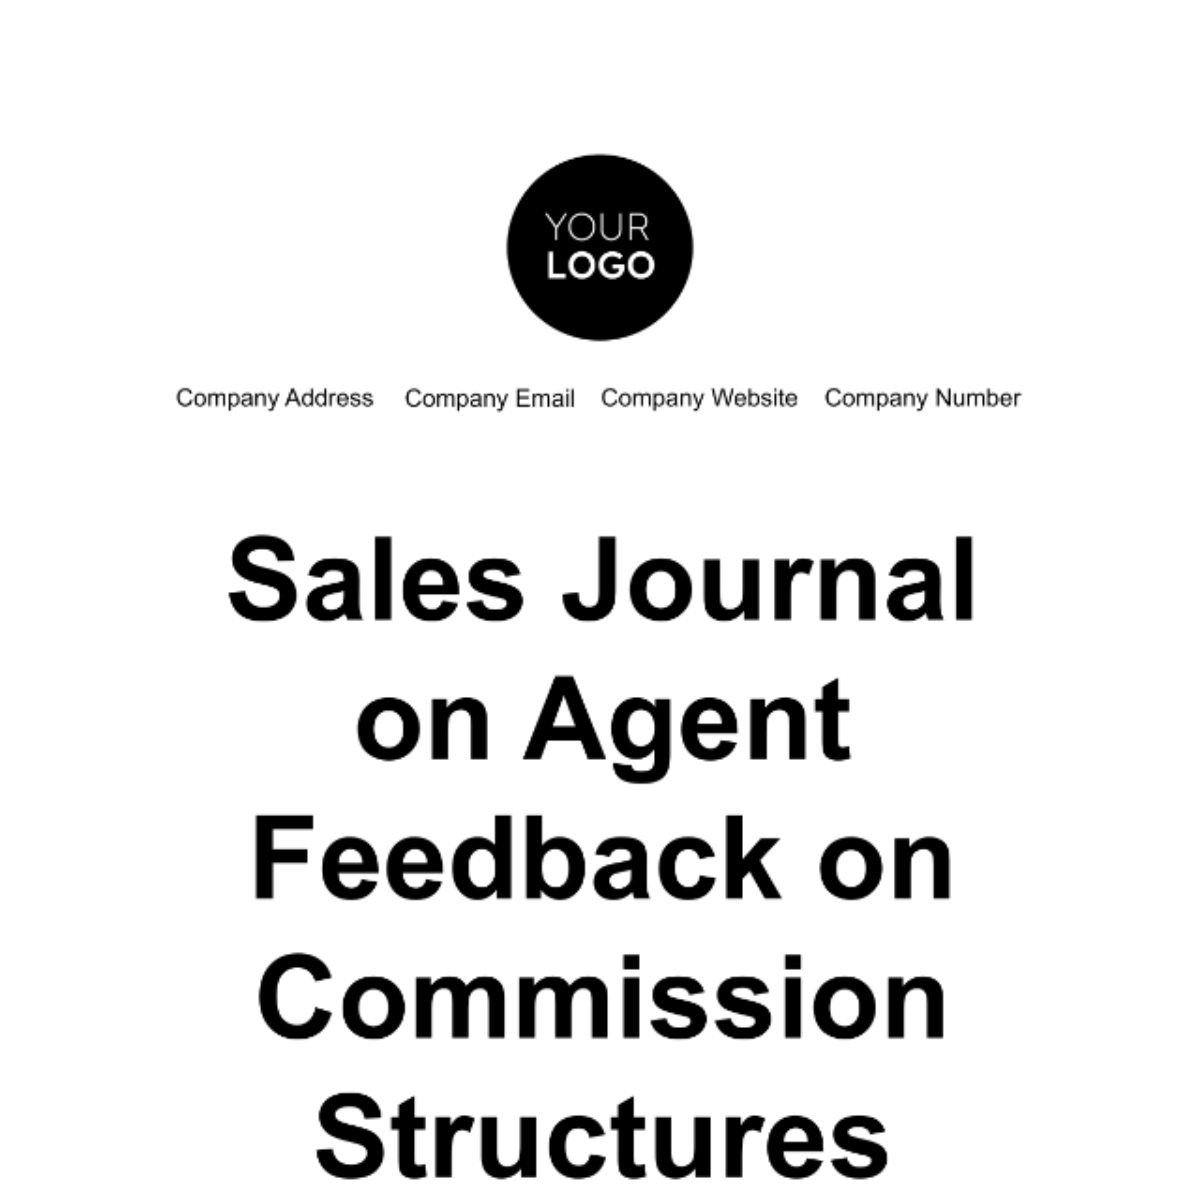 Free Sales Journal on Agent Feedback on Commission Structures Template